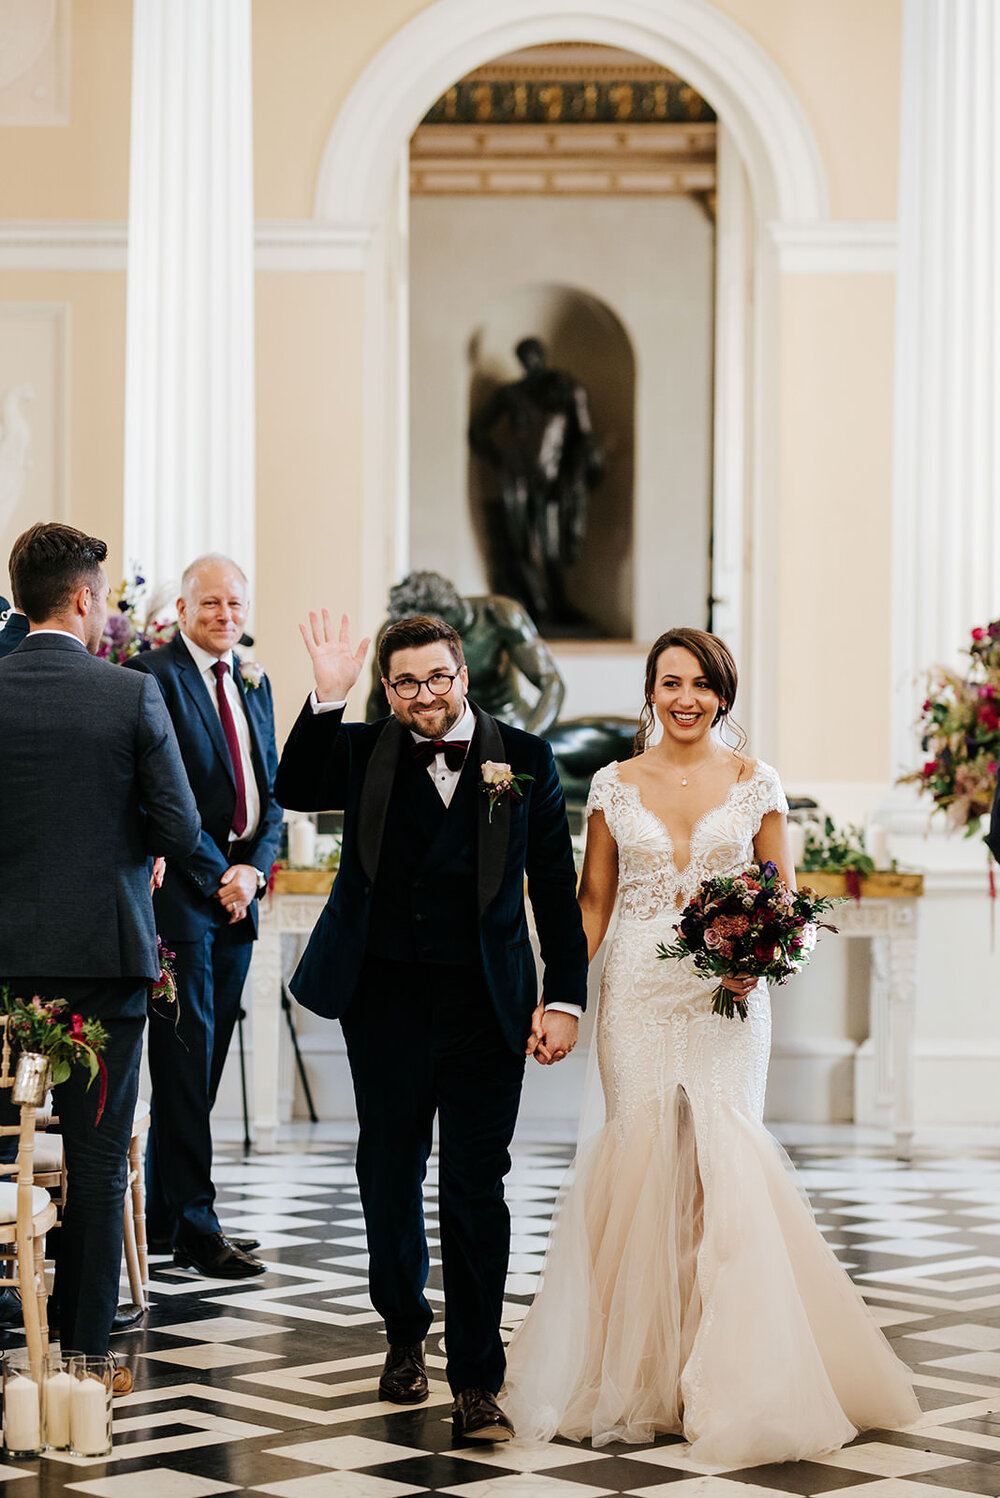 Bride and groom walk back down the aisle as married couple while groom waves at guests during Syon Park wedding